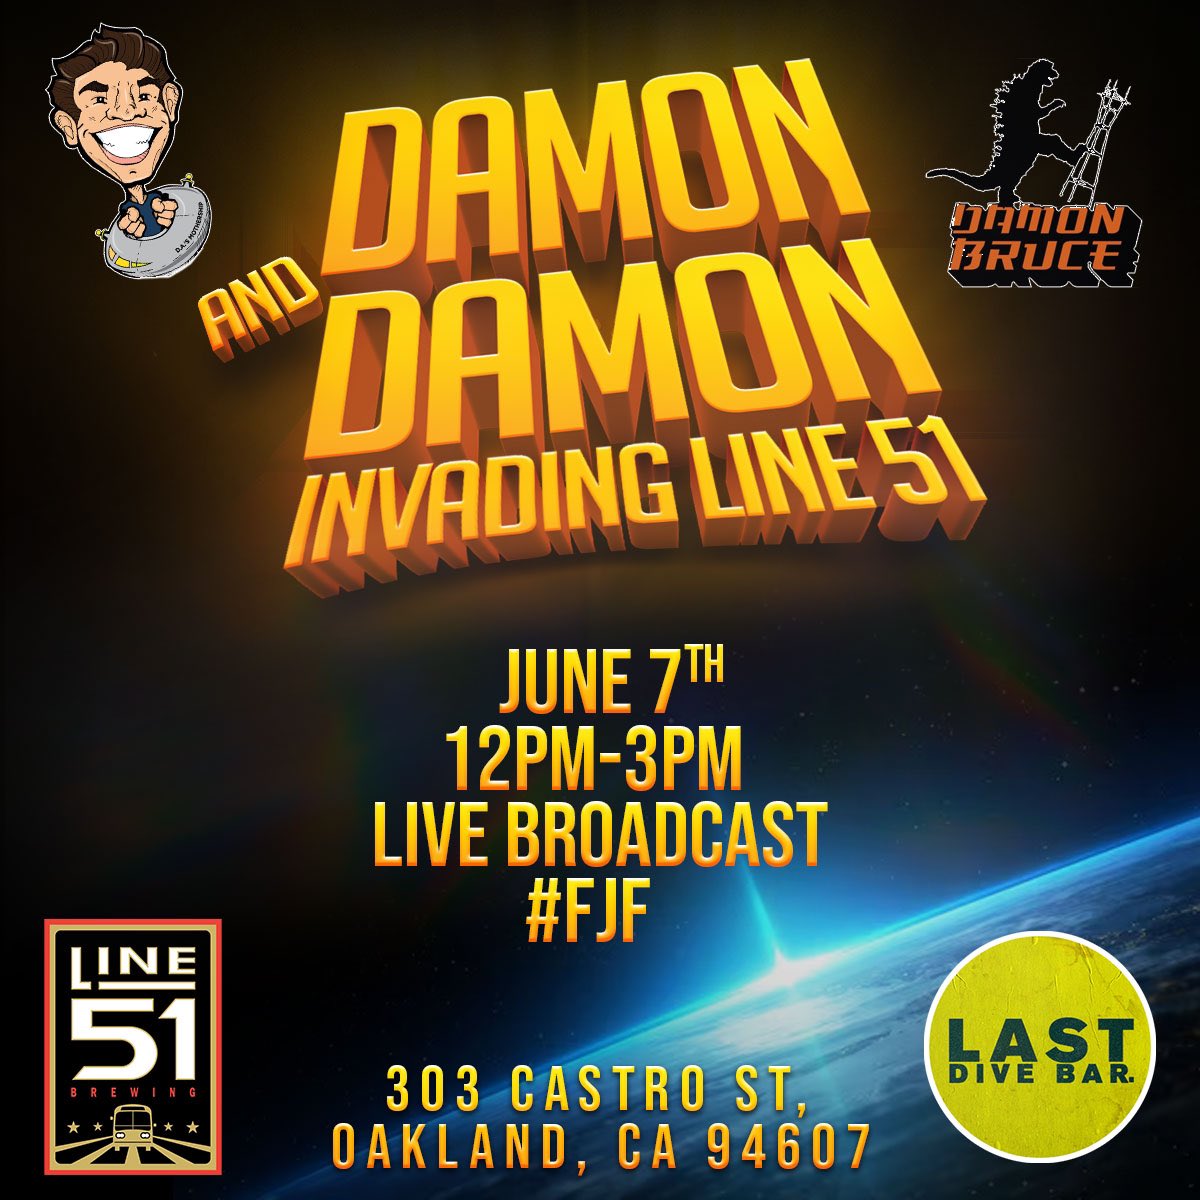 The Damon’s have united to bring you the ultimate live broadcast on 6/7!!! This is the official pre party to the highly anticipated #FJFisherFest Reverse Boycott! The live broadcast will be held by our amazing host and Fans Fest Sponsor, @line51beer at 303 Castro St.,…